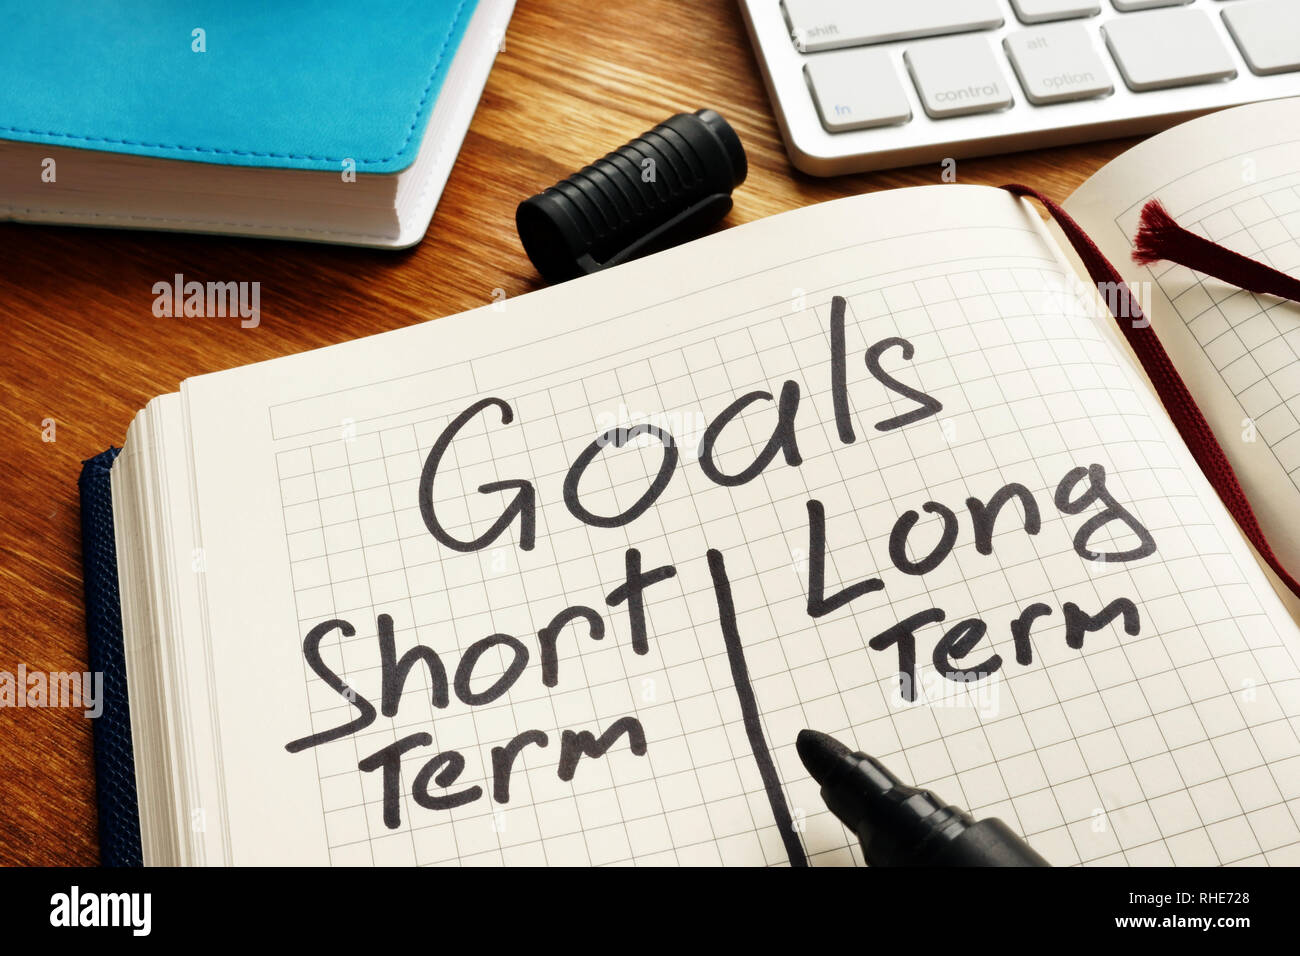 List of Goals with short term and long term. Stock Photo